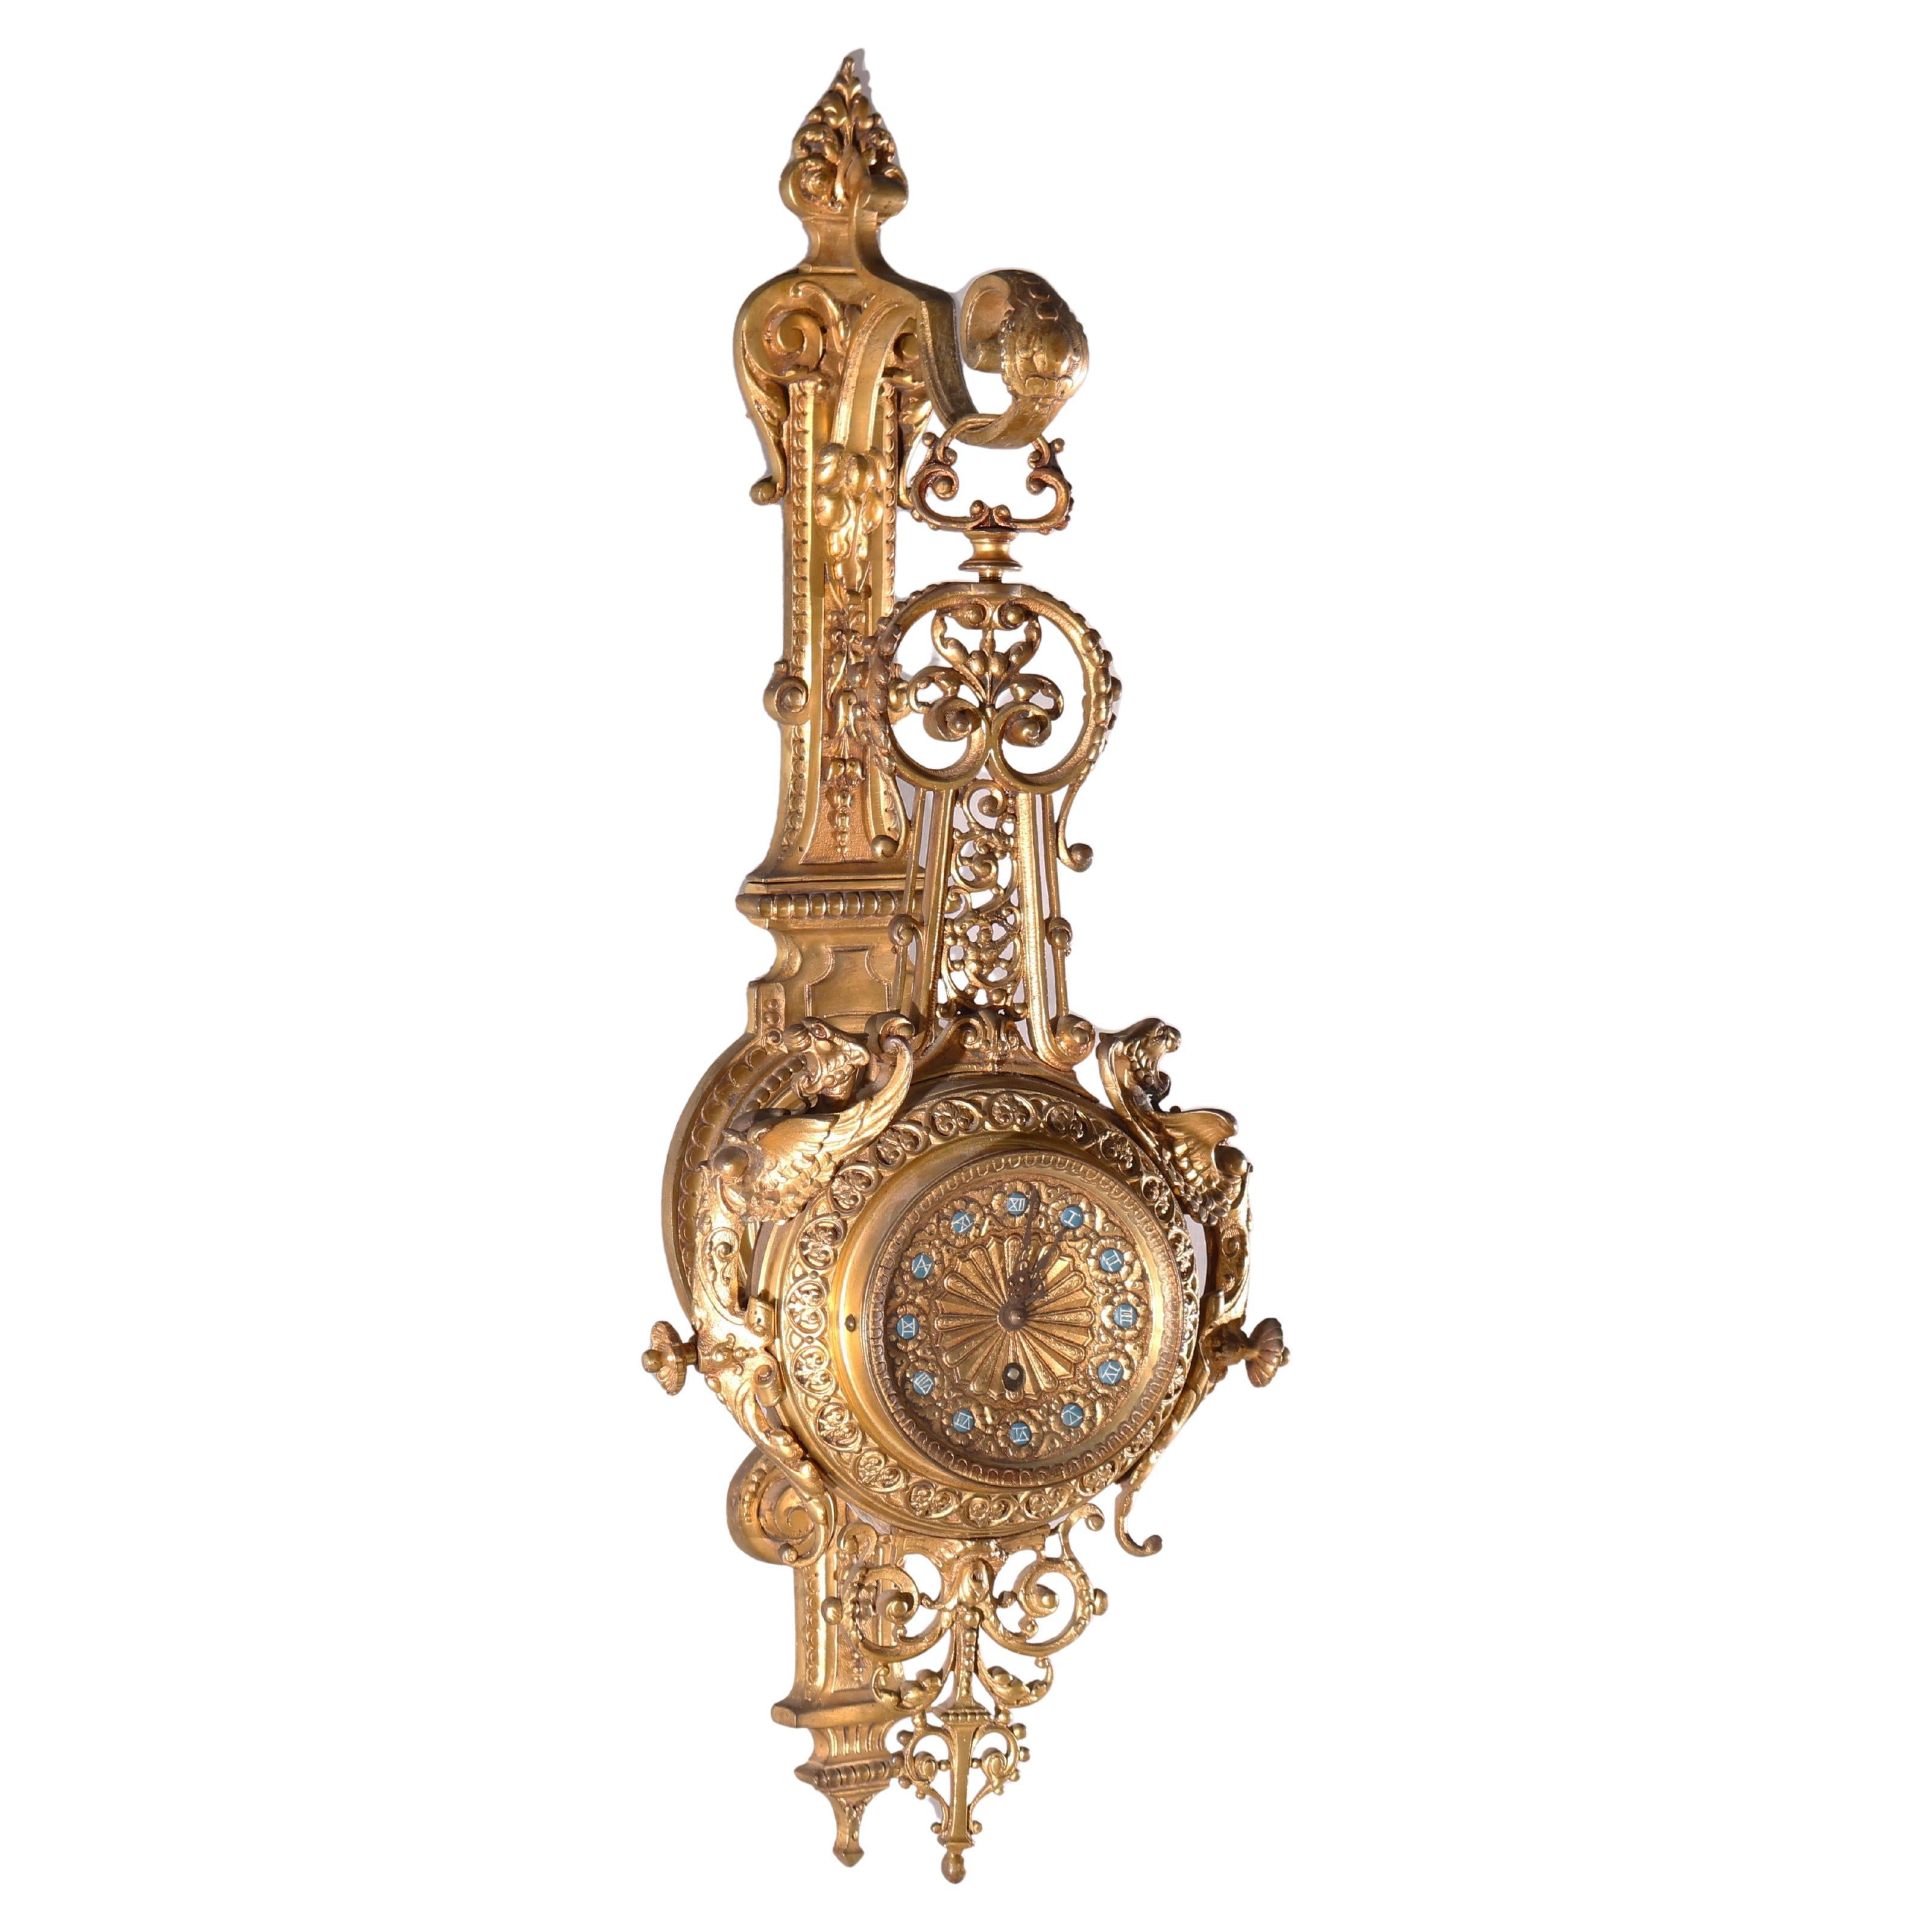 Antique French Empire Style Figural Gilt Bronze Hanging Wall Clock, circa 1880